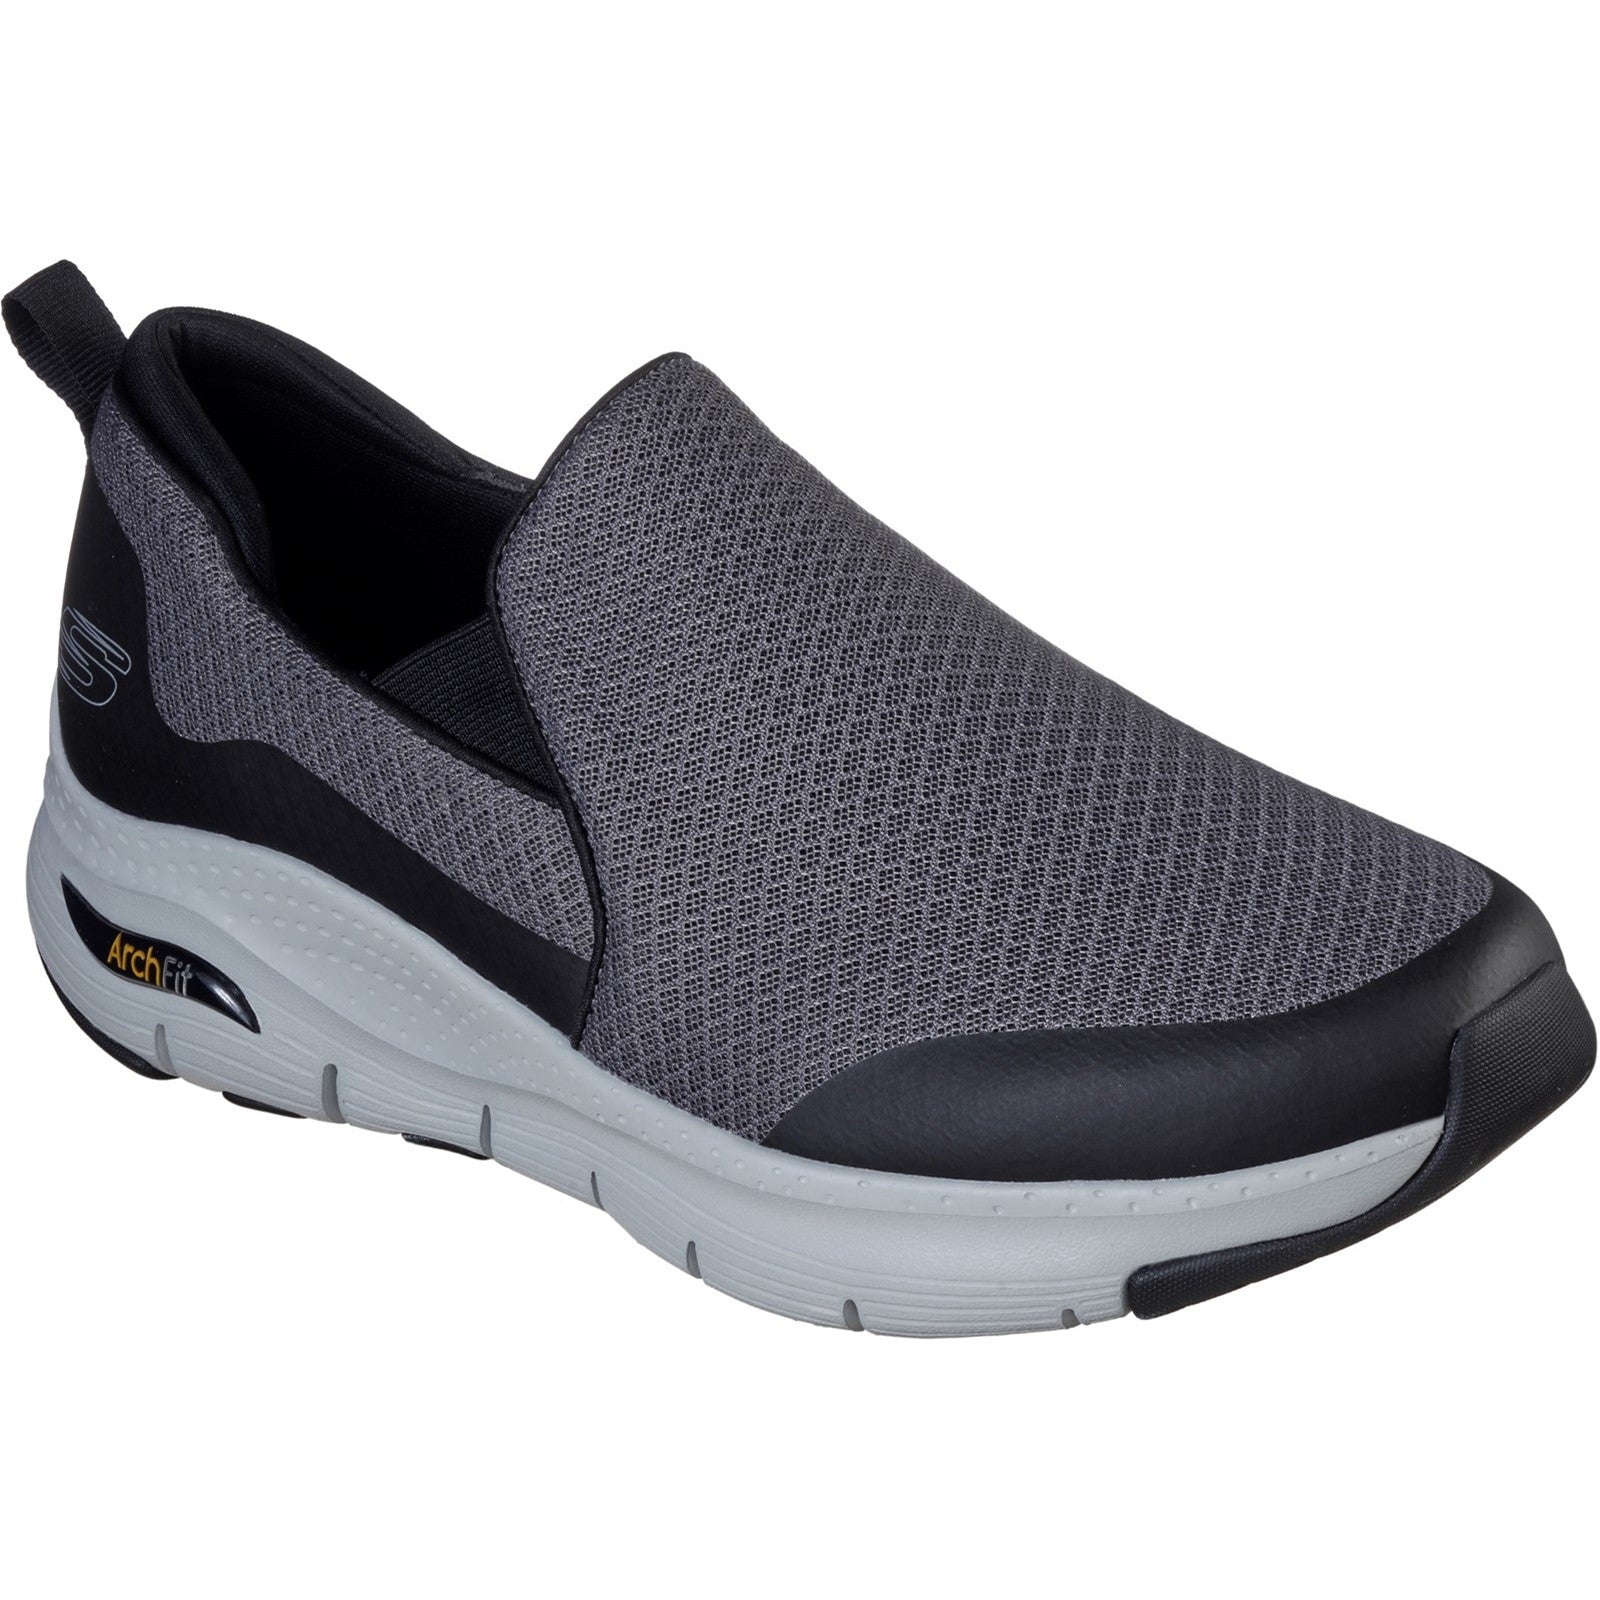 Skechers Arch Fit Banlin Slip On Sports Trainers